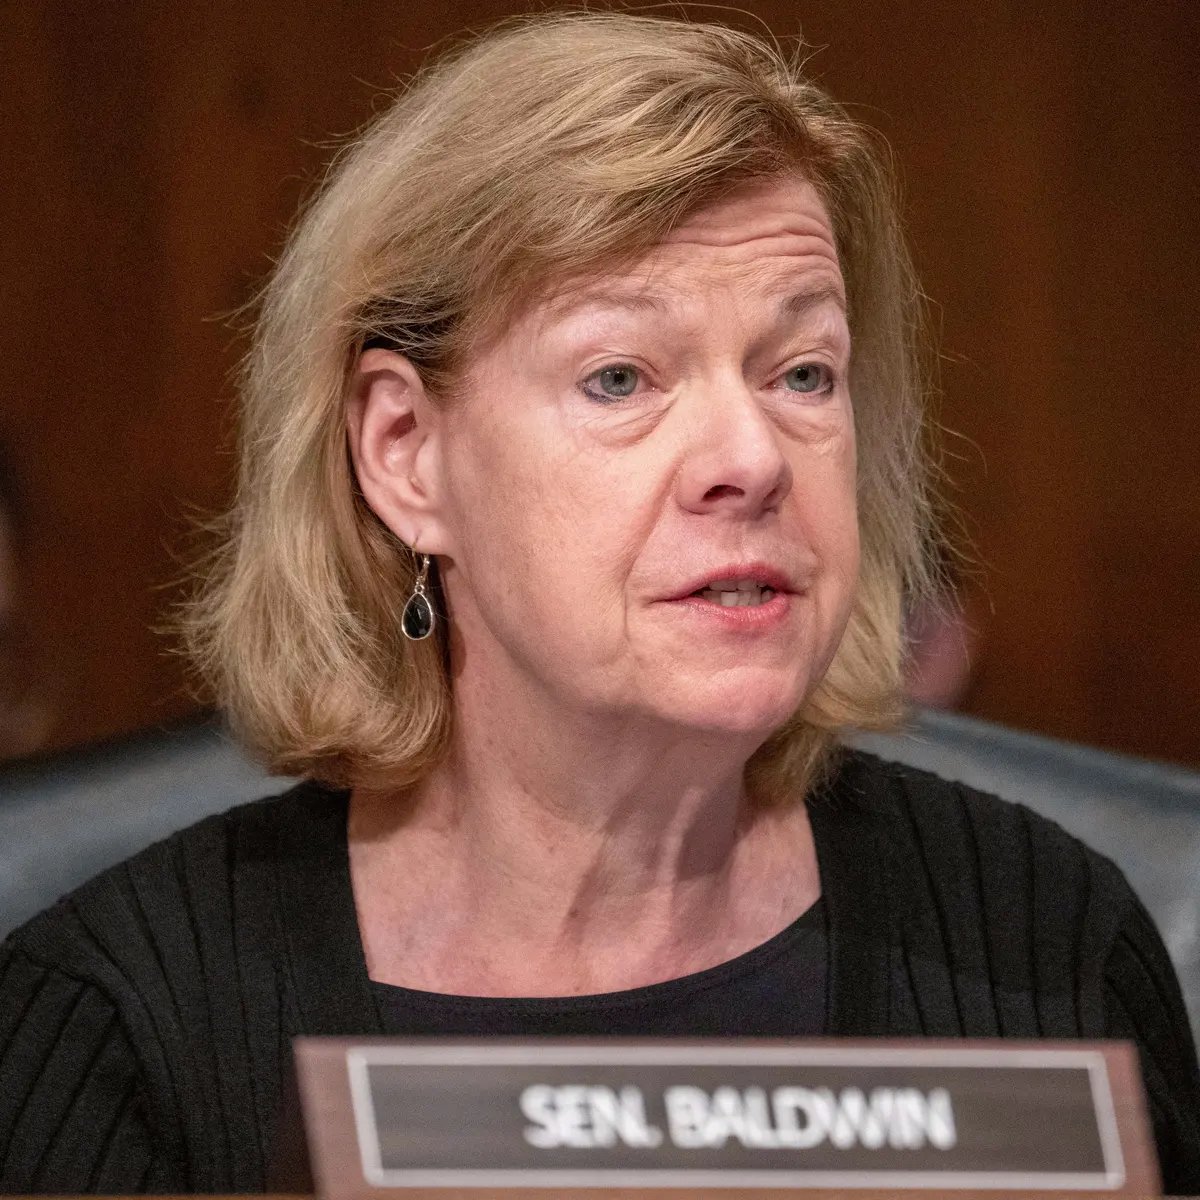 Exclusive: I accuse United States Senator Tammy Baldwin of criminally laundering $27,850,750 into her campaigns since 2017, including the current one. She is committing illegal Smurfing, i.e. structured money laundering. We have documented this in extreme detail using state and